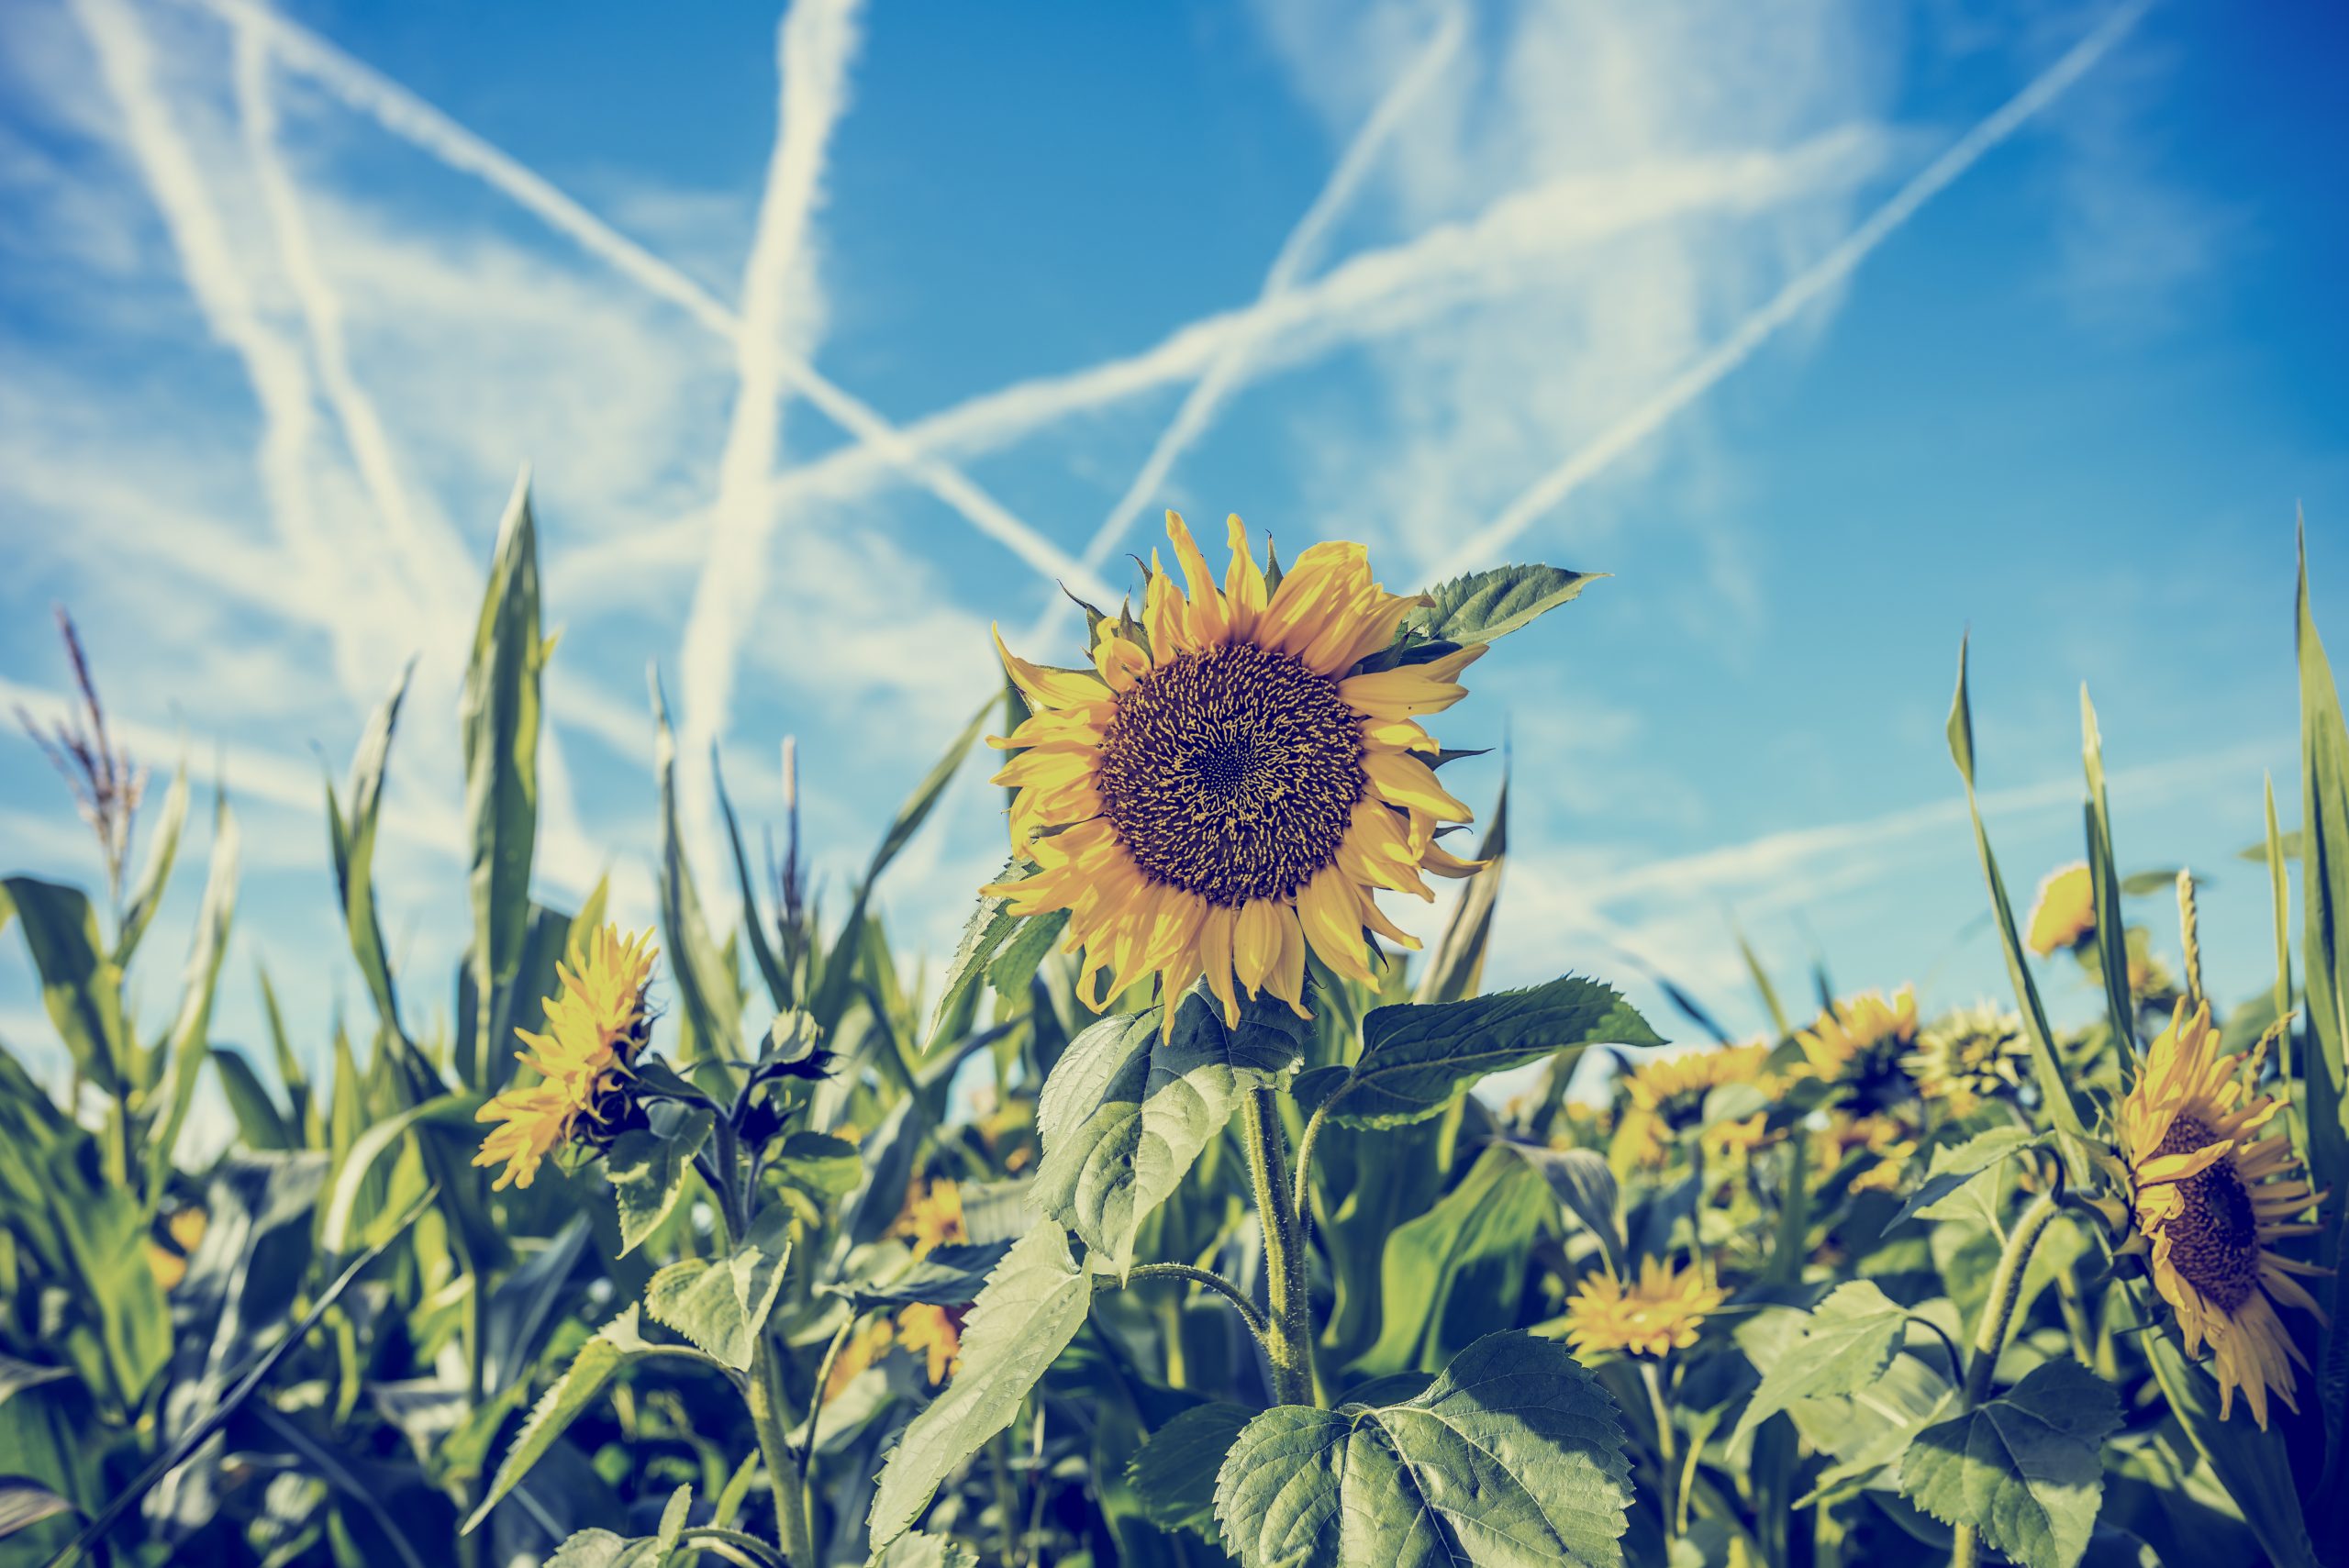 Artist illustration of flowers and contrails. Depositphotos.